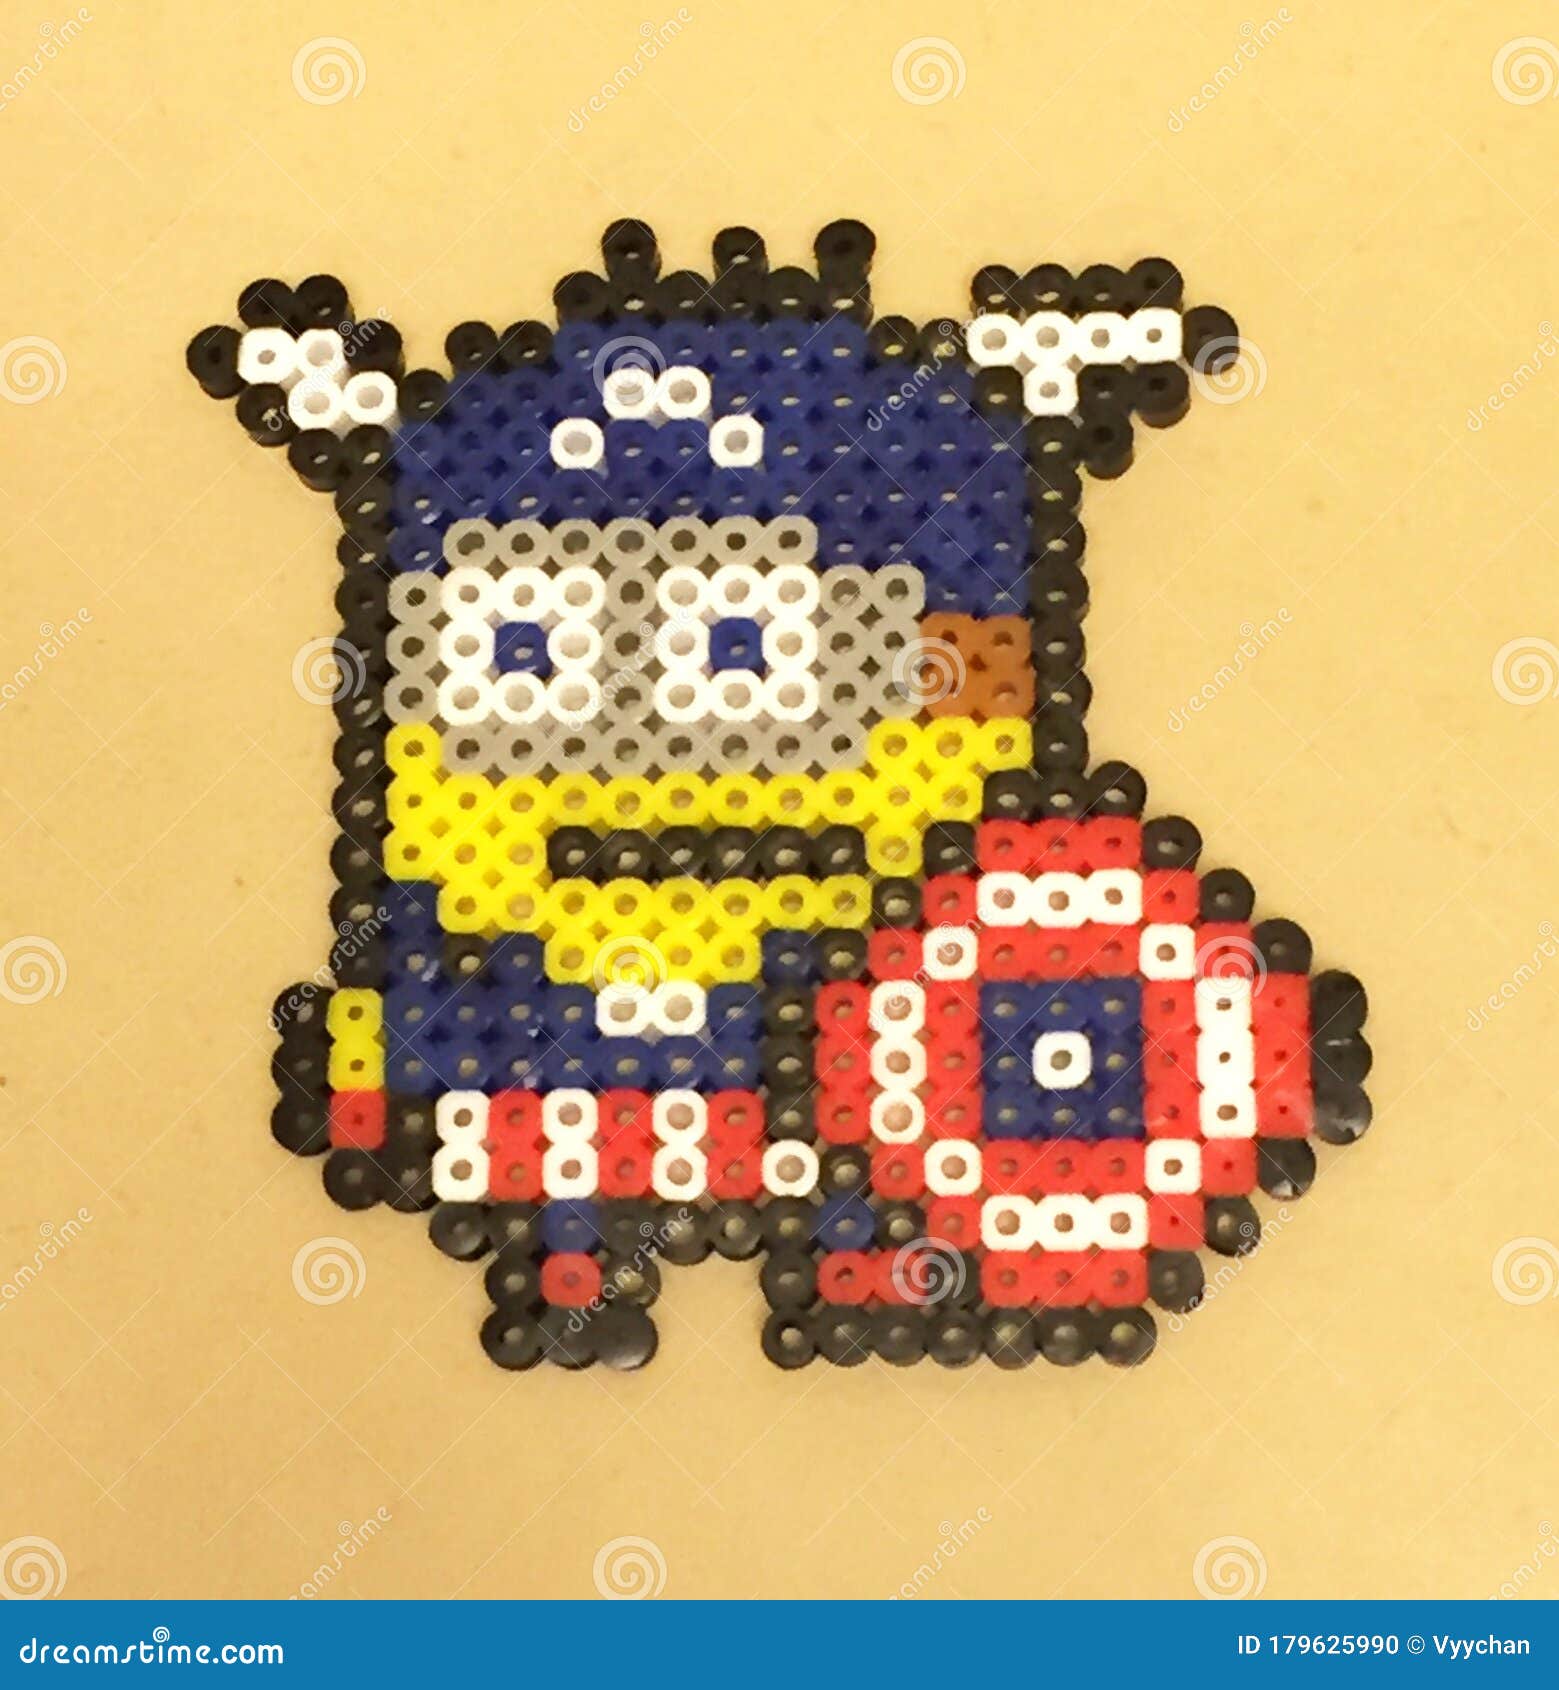 Crafts Beads Beading Arts Minions Mosaic Minion Captain America Despicable  Me Cartoon Movie Character Collage Editorial Image - Image of character,  design: 179625990